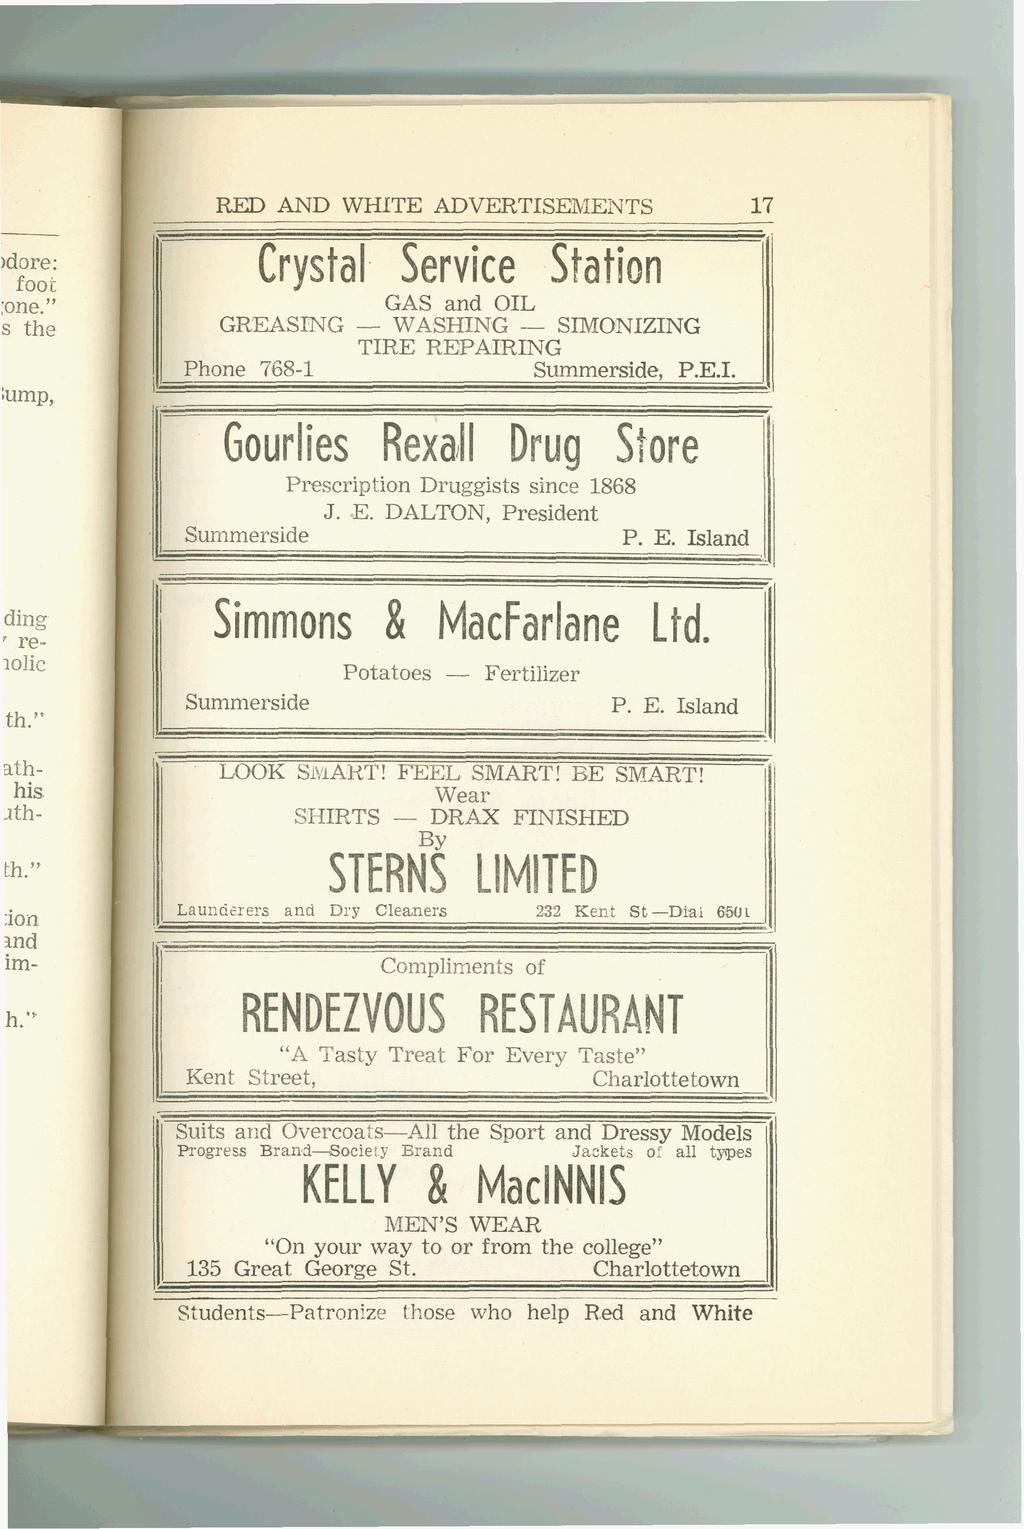 RE=D AND WHITE ADVERTISWIENTS Crystal Service Station 17 GAS and OIL GREASTNG WASHING SIMONIZING 1 TIRE REPAIRING?Phone 7681 Summerside, P.E.I. Gourlies Rexall Drug Gore Prescription Druggists since 1868 J.